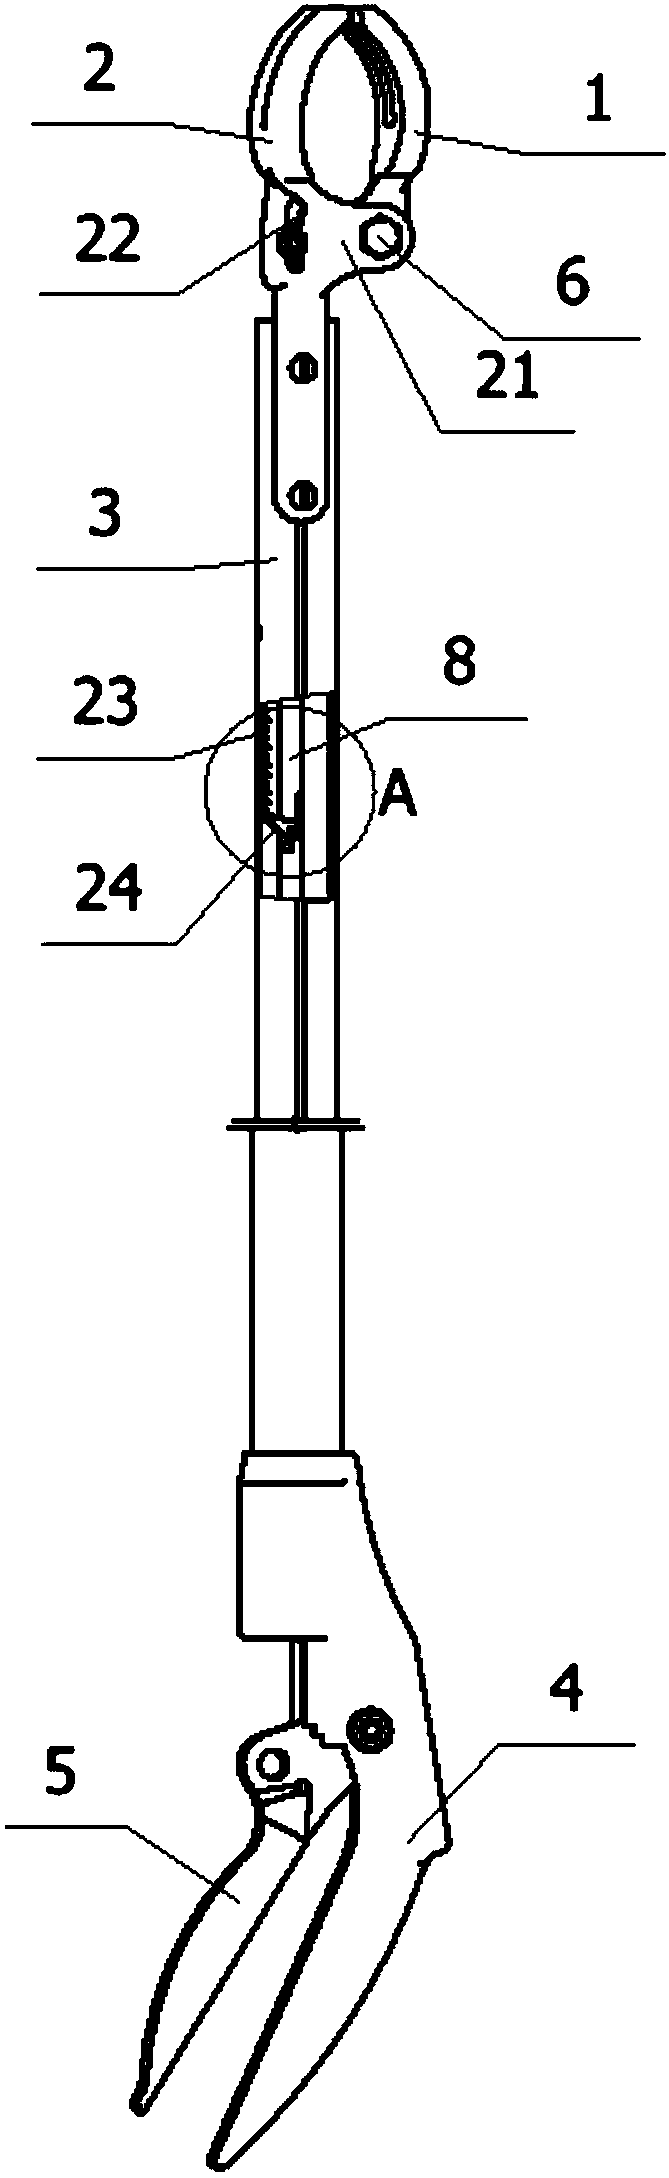 Self-locking cable hooker suspension device